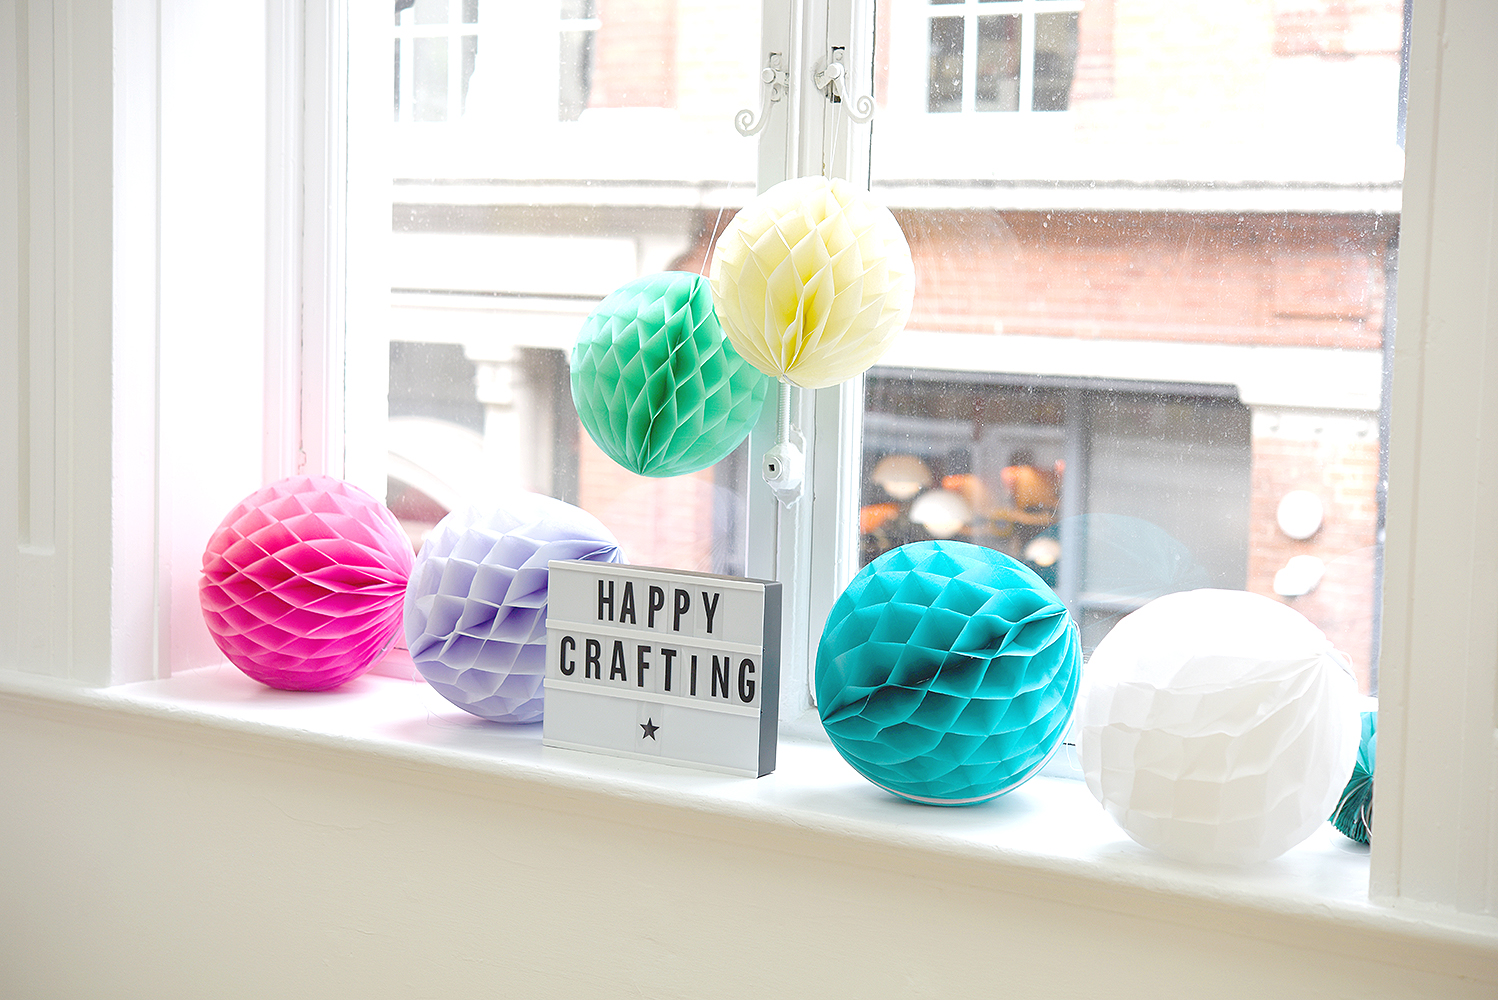 Paper lanterns in front of window with happy crafting lightbox